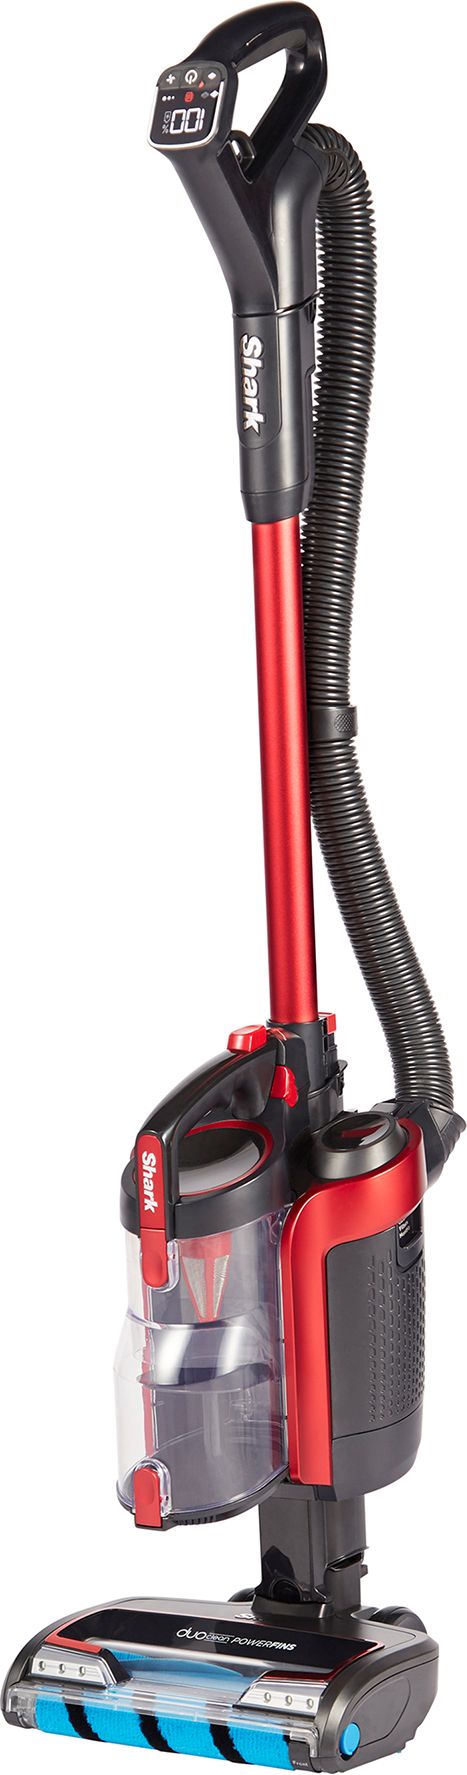 Shark Anti-Hair Wrap with PowerFins & Powered Lift Away ICZ300UK Cordless Vacuum Cleaner with up to 60 Minutes Run Time - Red, Red